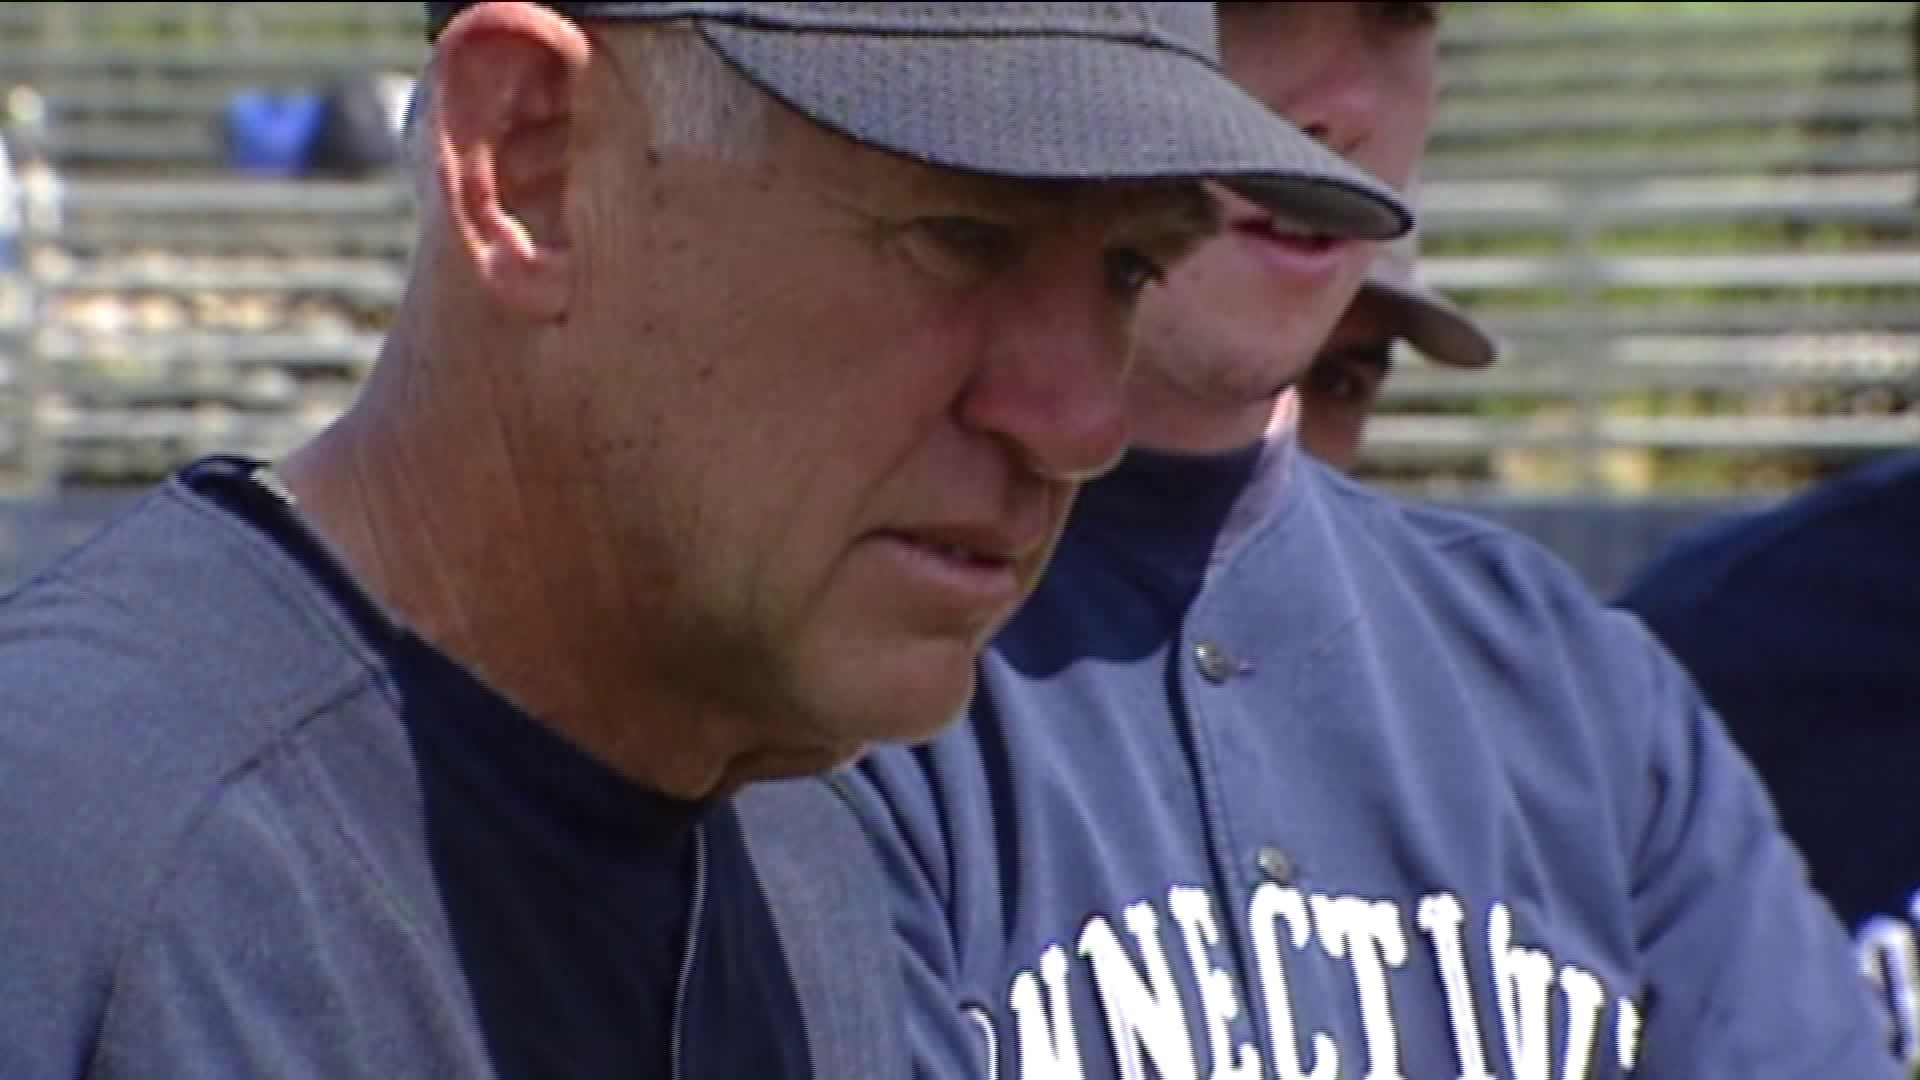 Uconn baseball coach inducted to New England Intercollegiate Hall of Fame